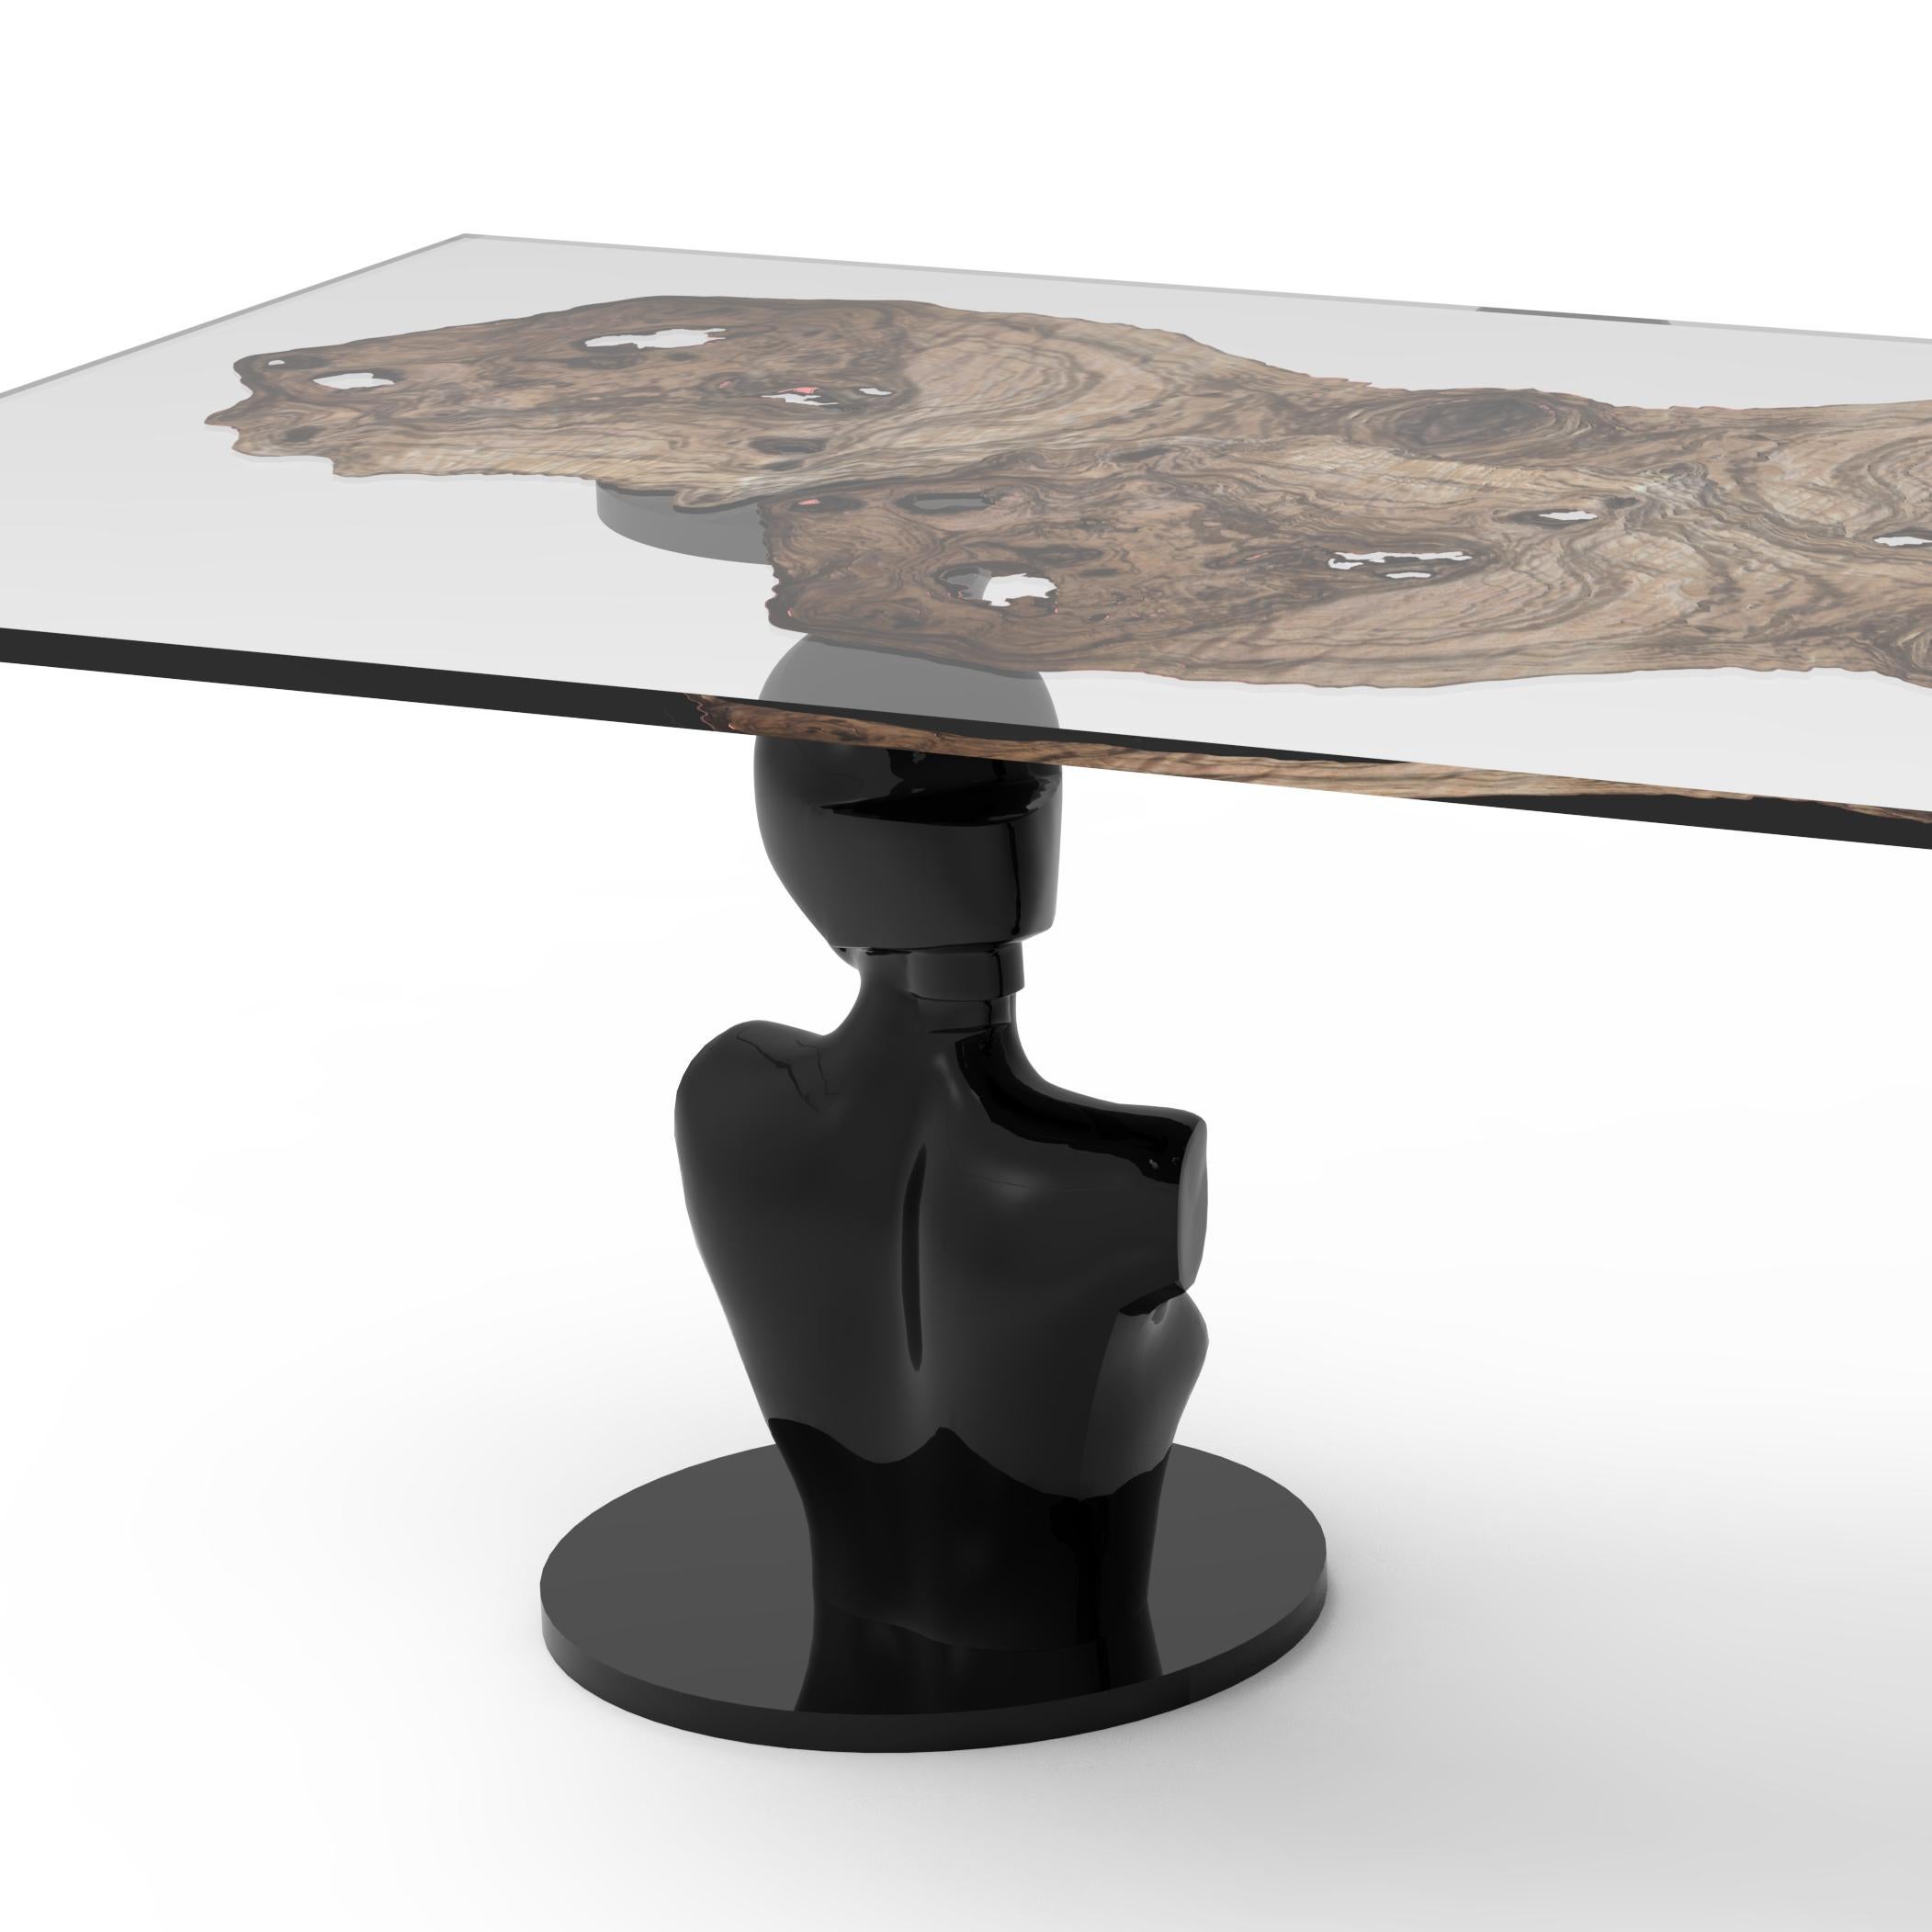 21st Century Lorsky Table, Resin and Elm Veneer, Carved Wood Base, Made in Italy In New Condition For Sale In Nocera Superiore, Campania